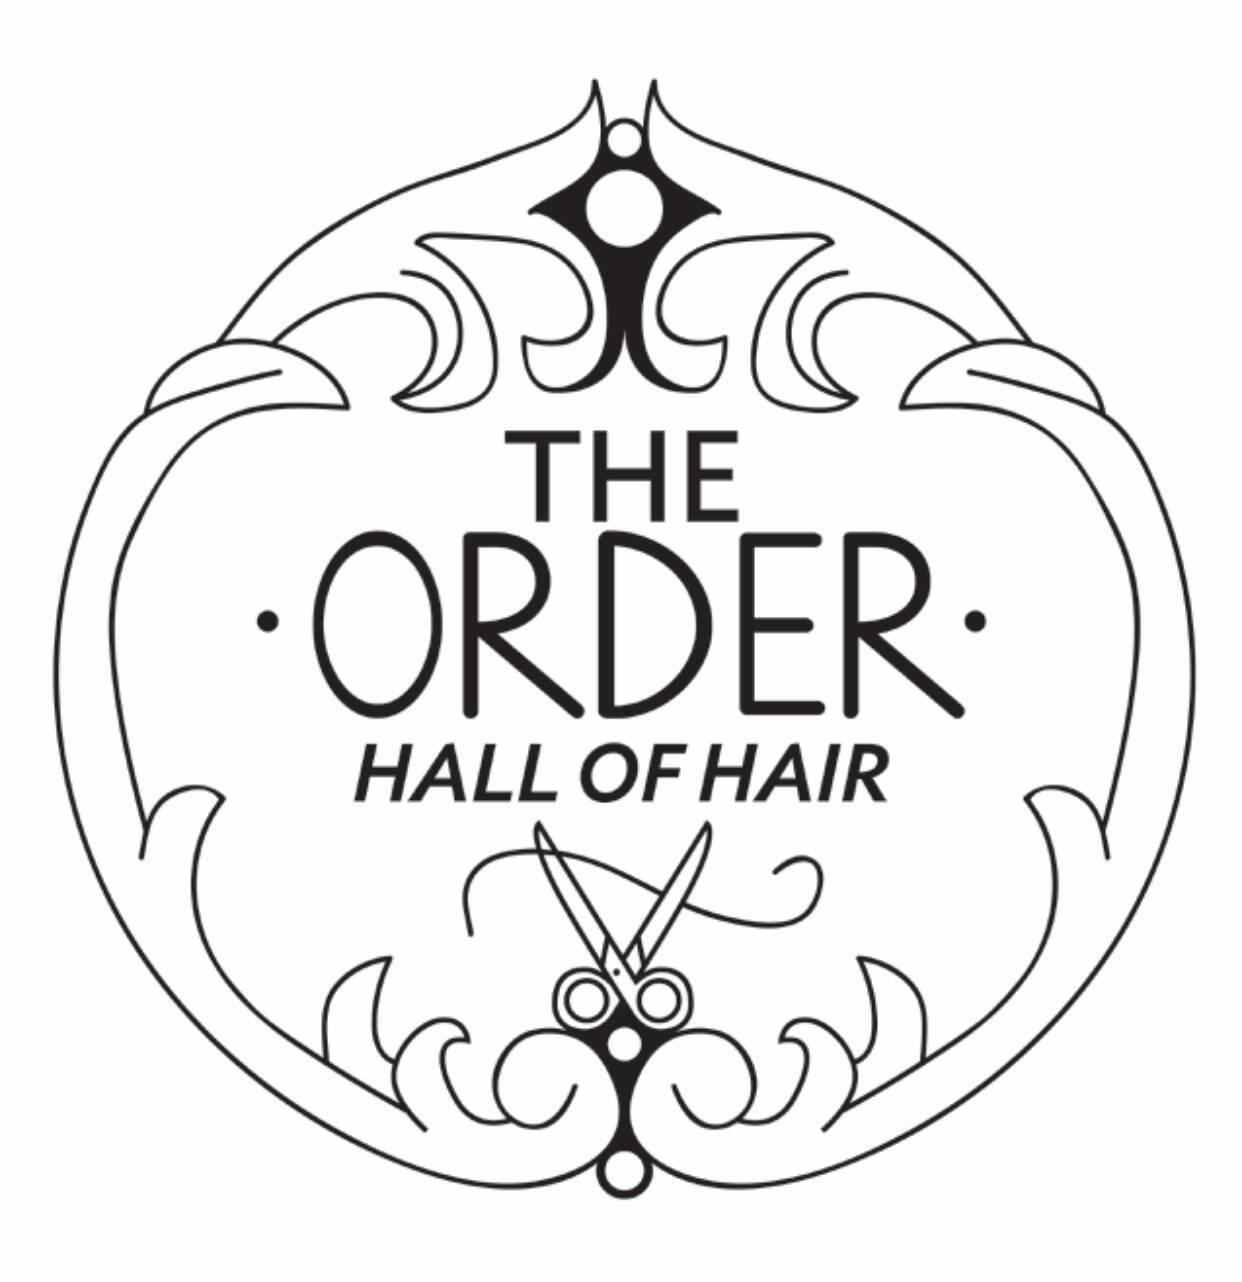 The Order Hall of Hair - St Thomas